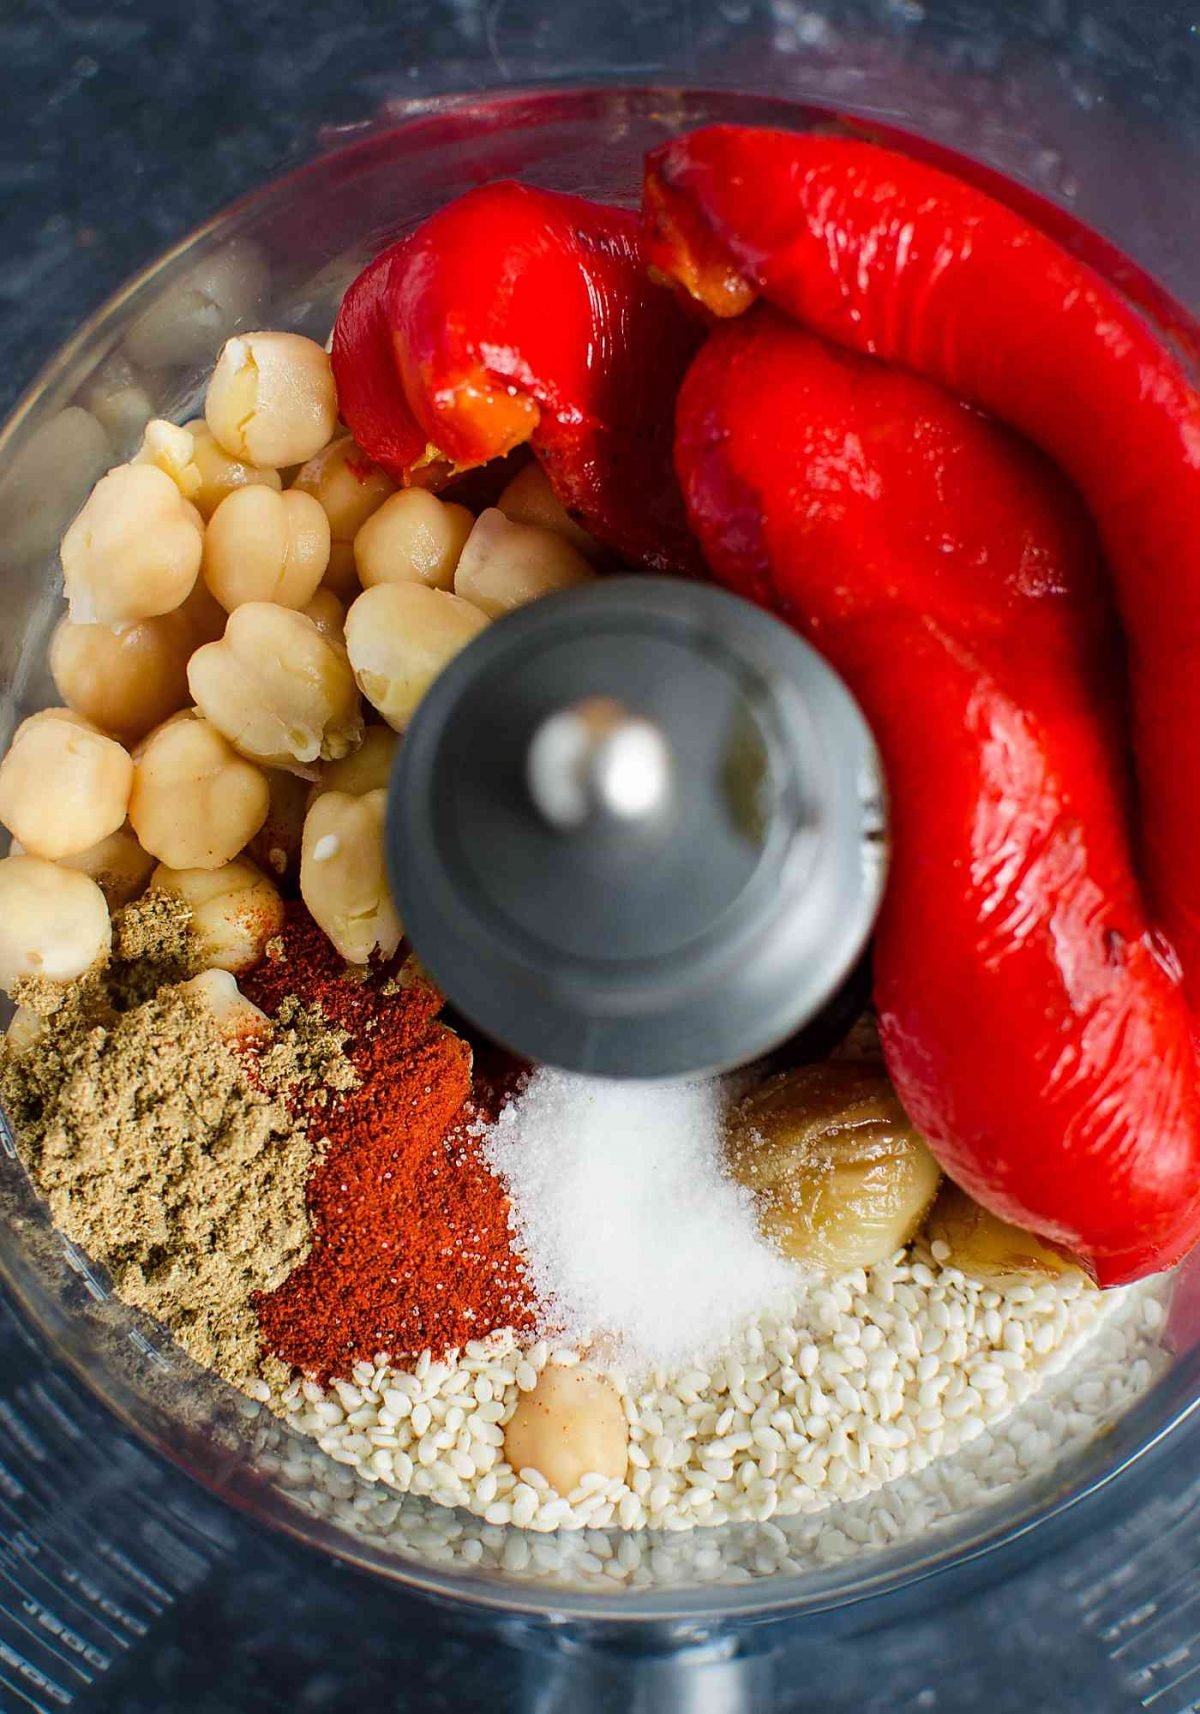 Easy homemade hummus prepared using roasted red peppers